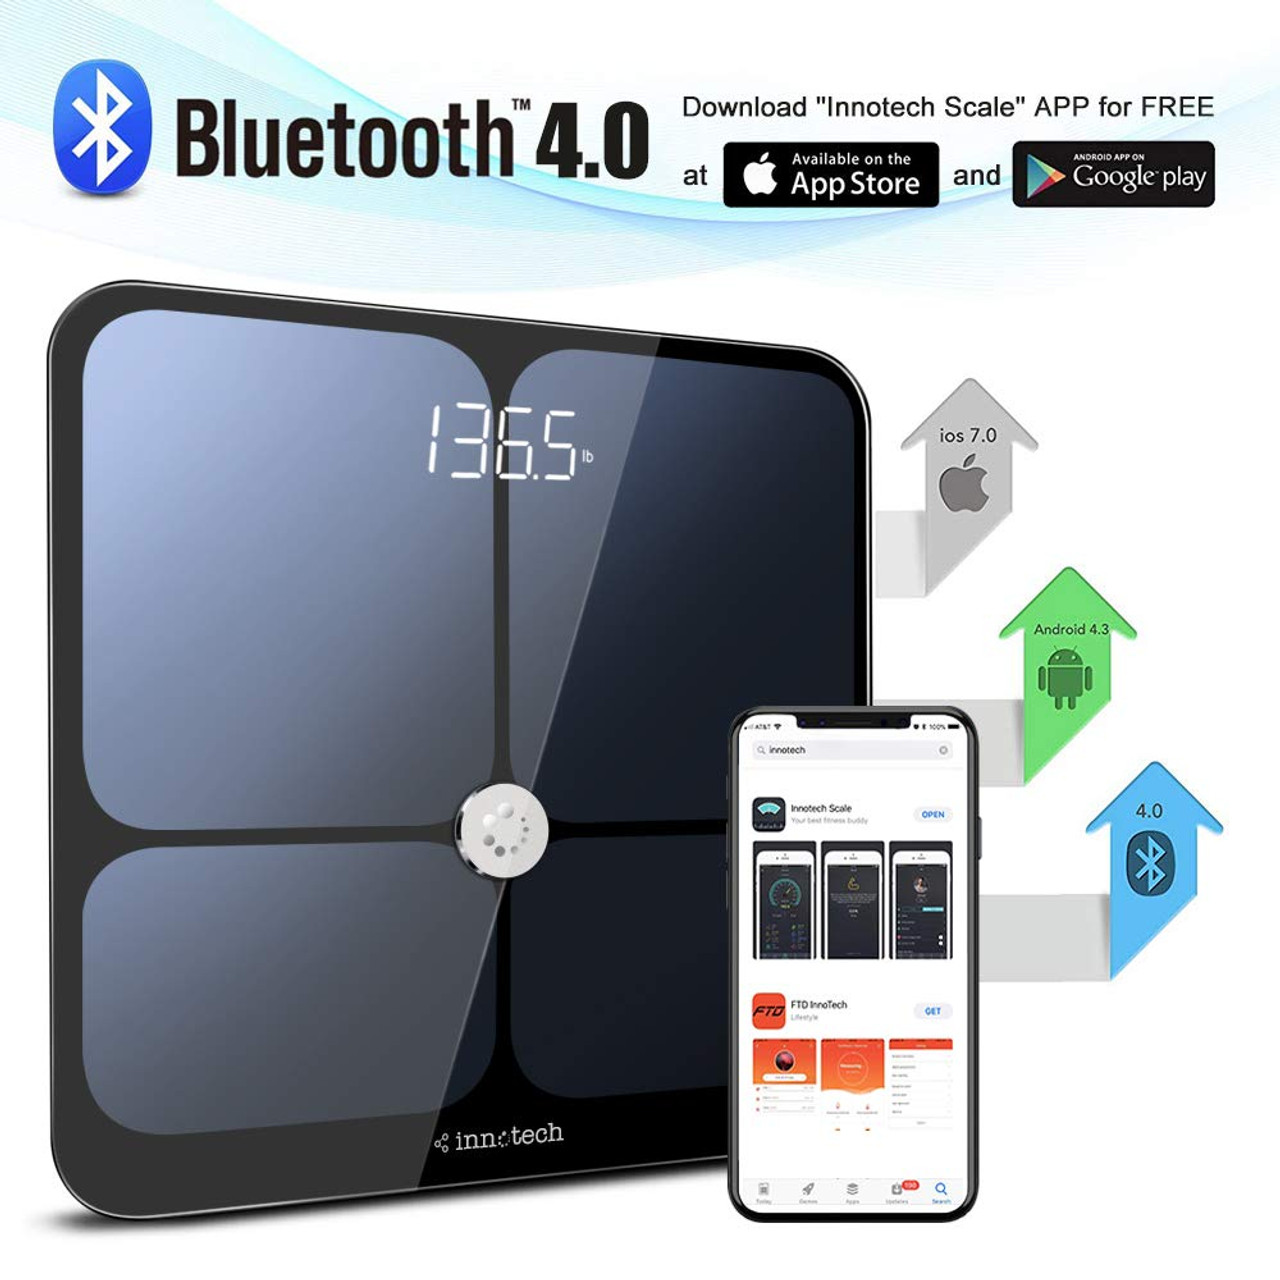 Toyuugo Bluetooth Body Fat Bathroom Scale,Scales Digital Weight,Weight Scale ,Body Composition Analyzer Wireless BMI with Smart Phone App Scales,396  Pounds / 180kg Max (Black)